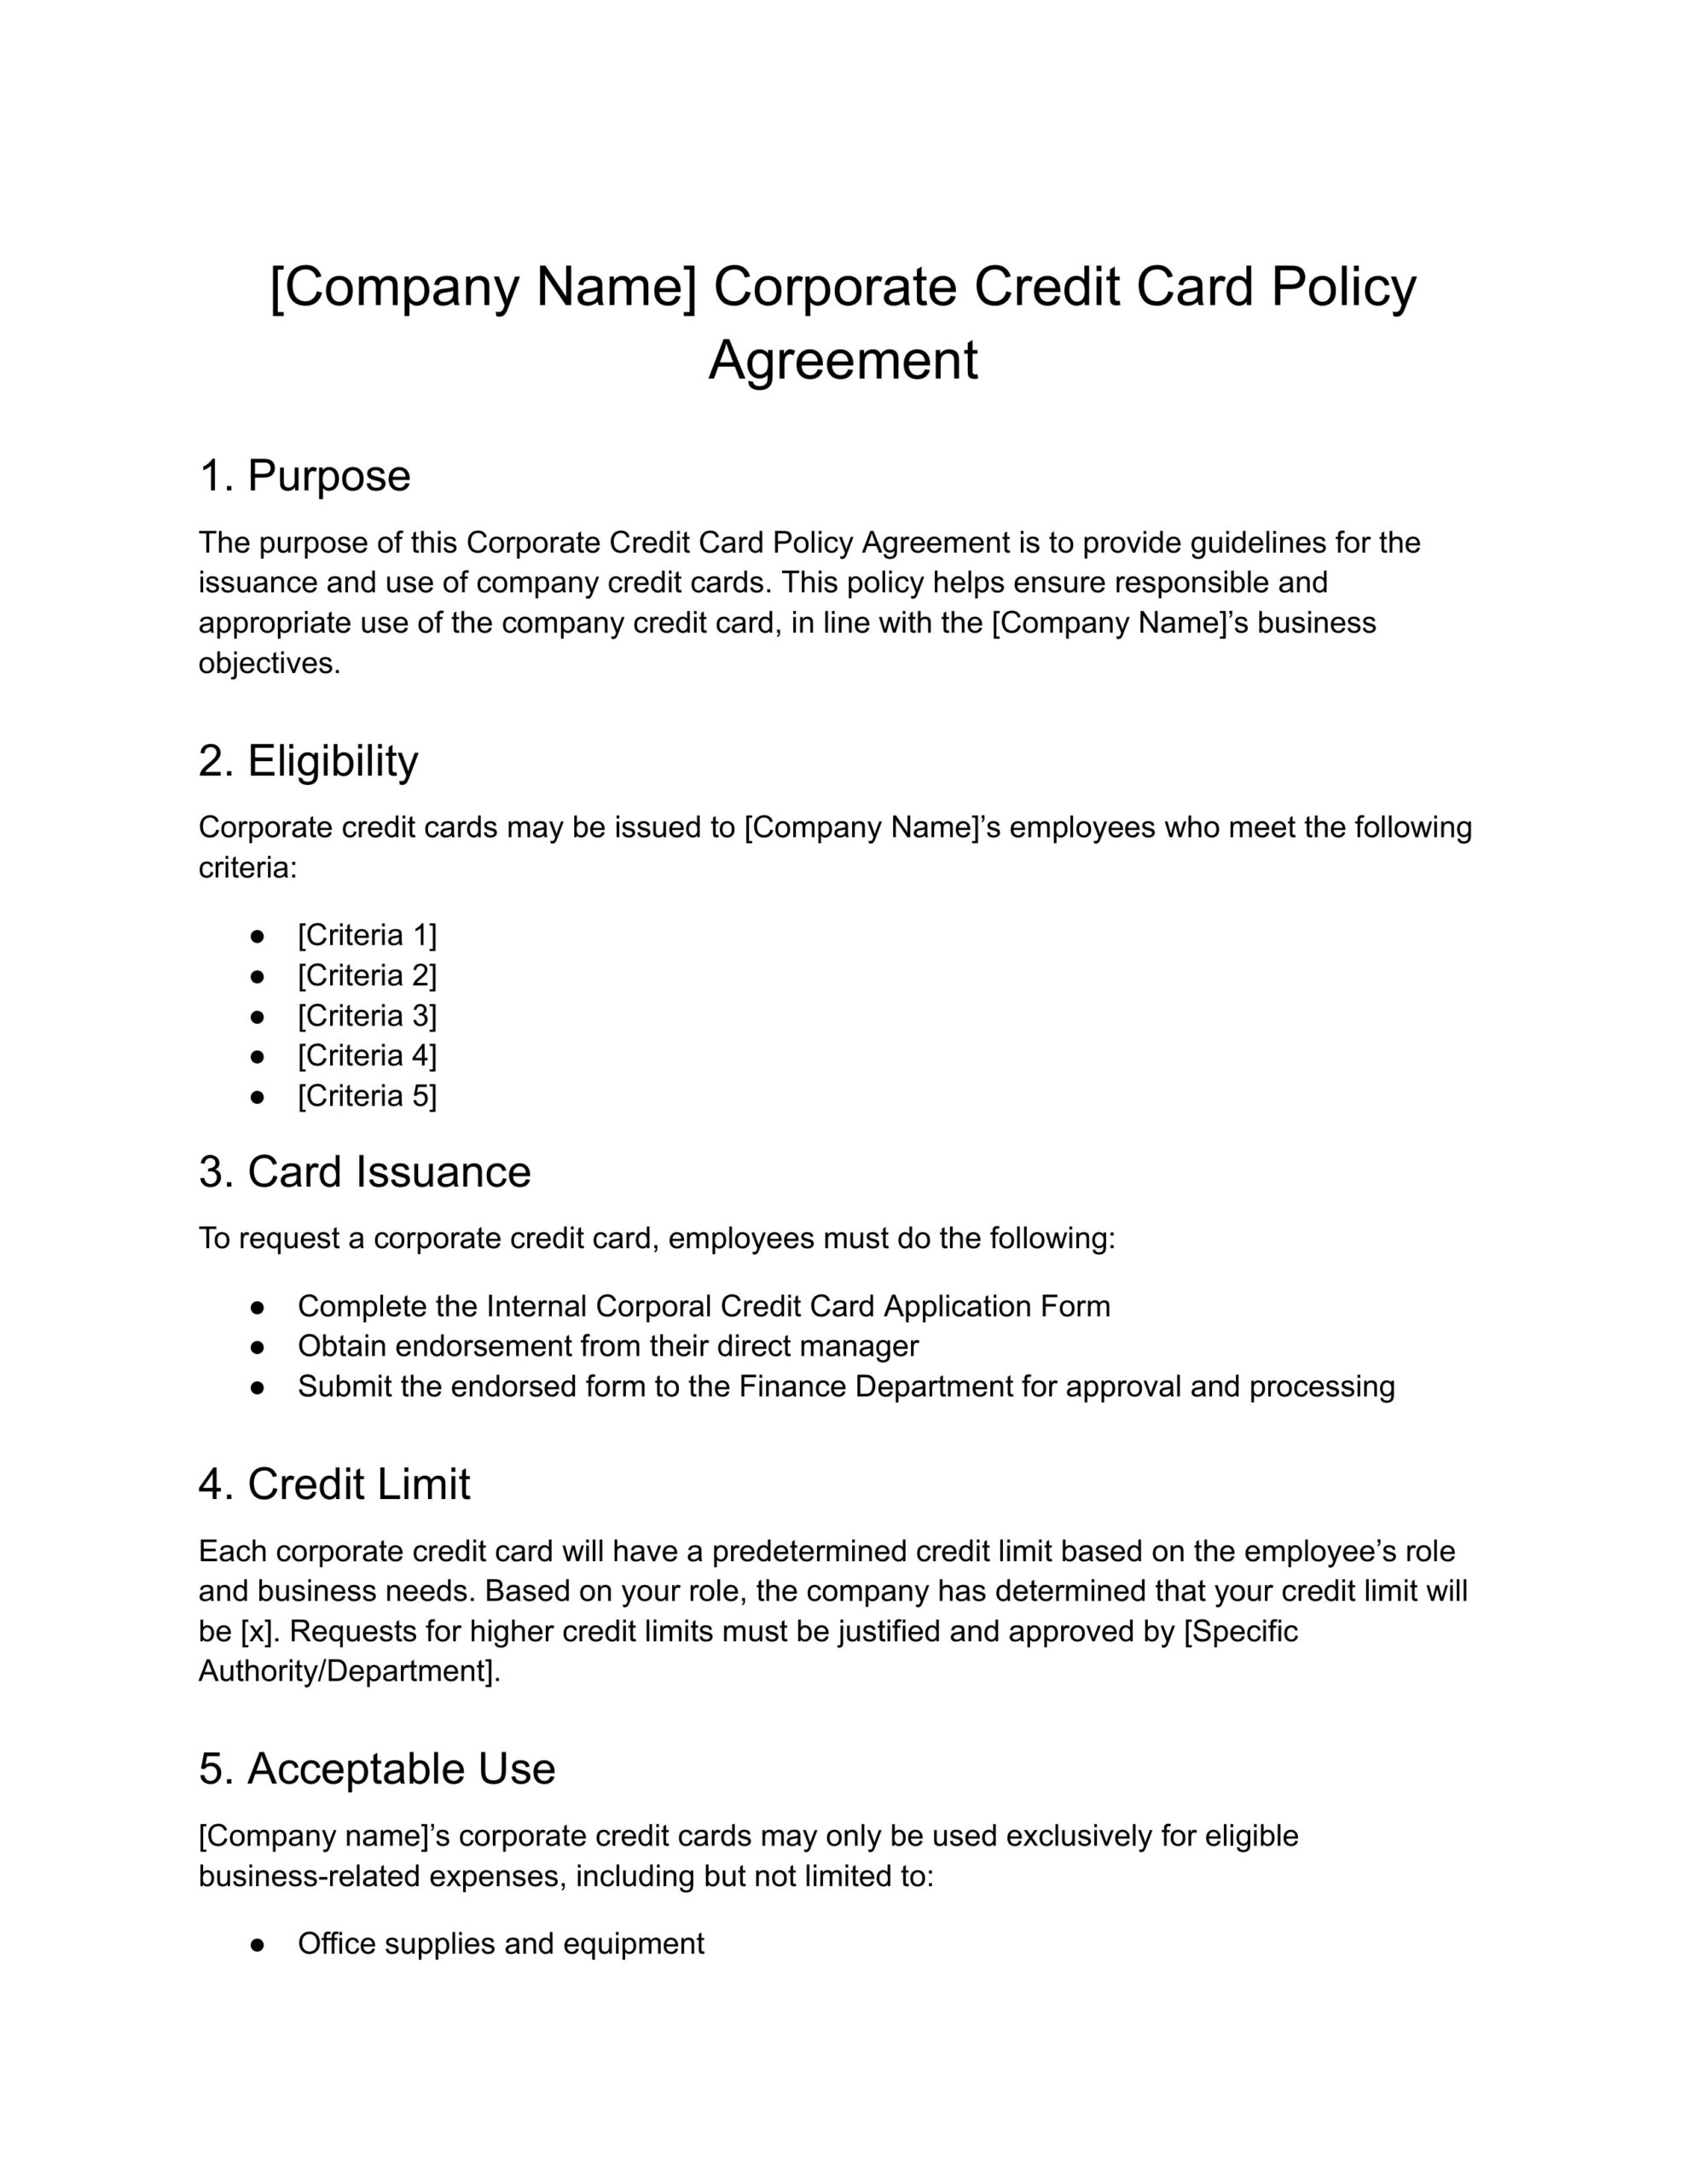 Screenshot of Corporate Credit Card Policy Template.